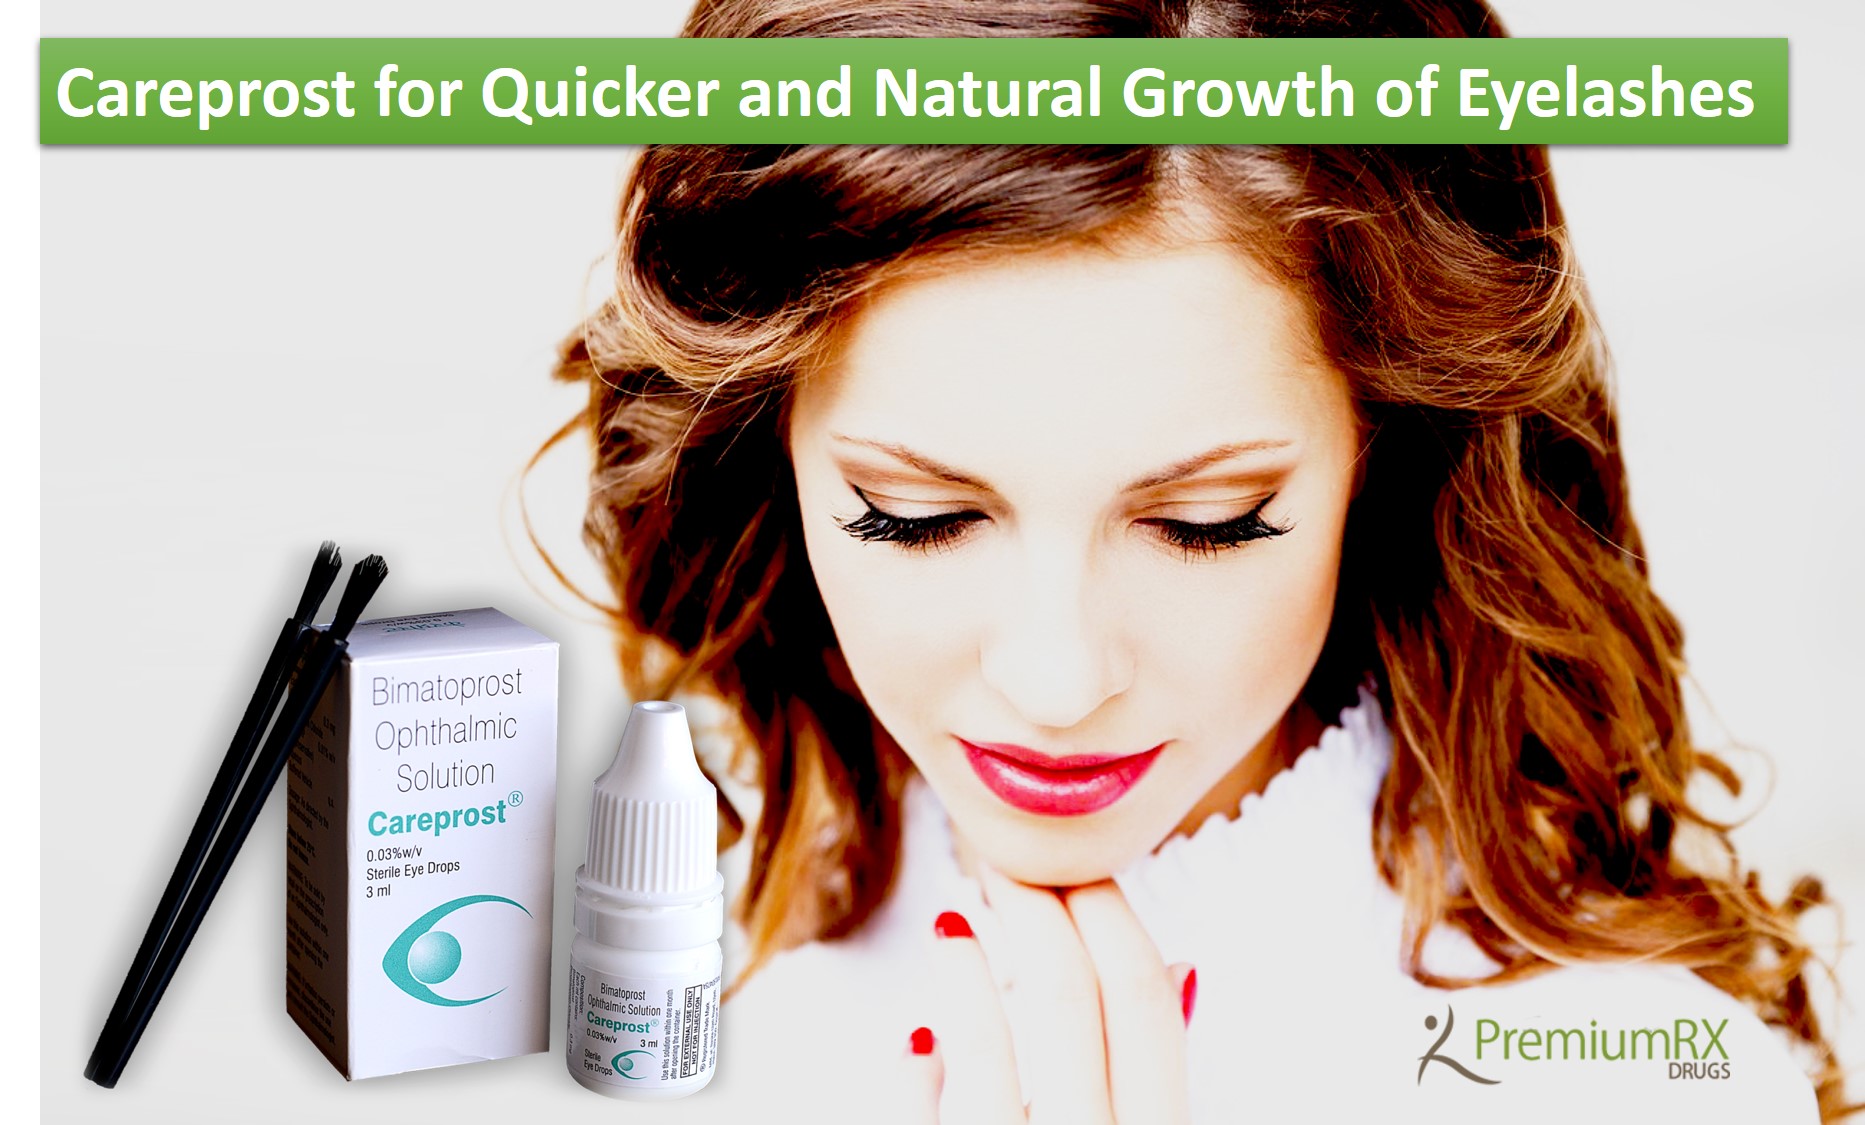 Careprost for Quicker and Natural Growth of Eyelashes